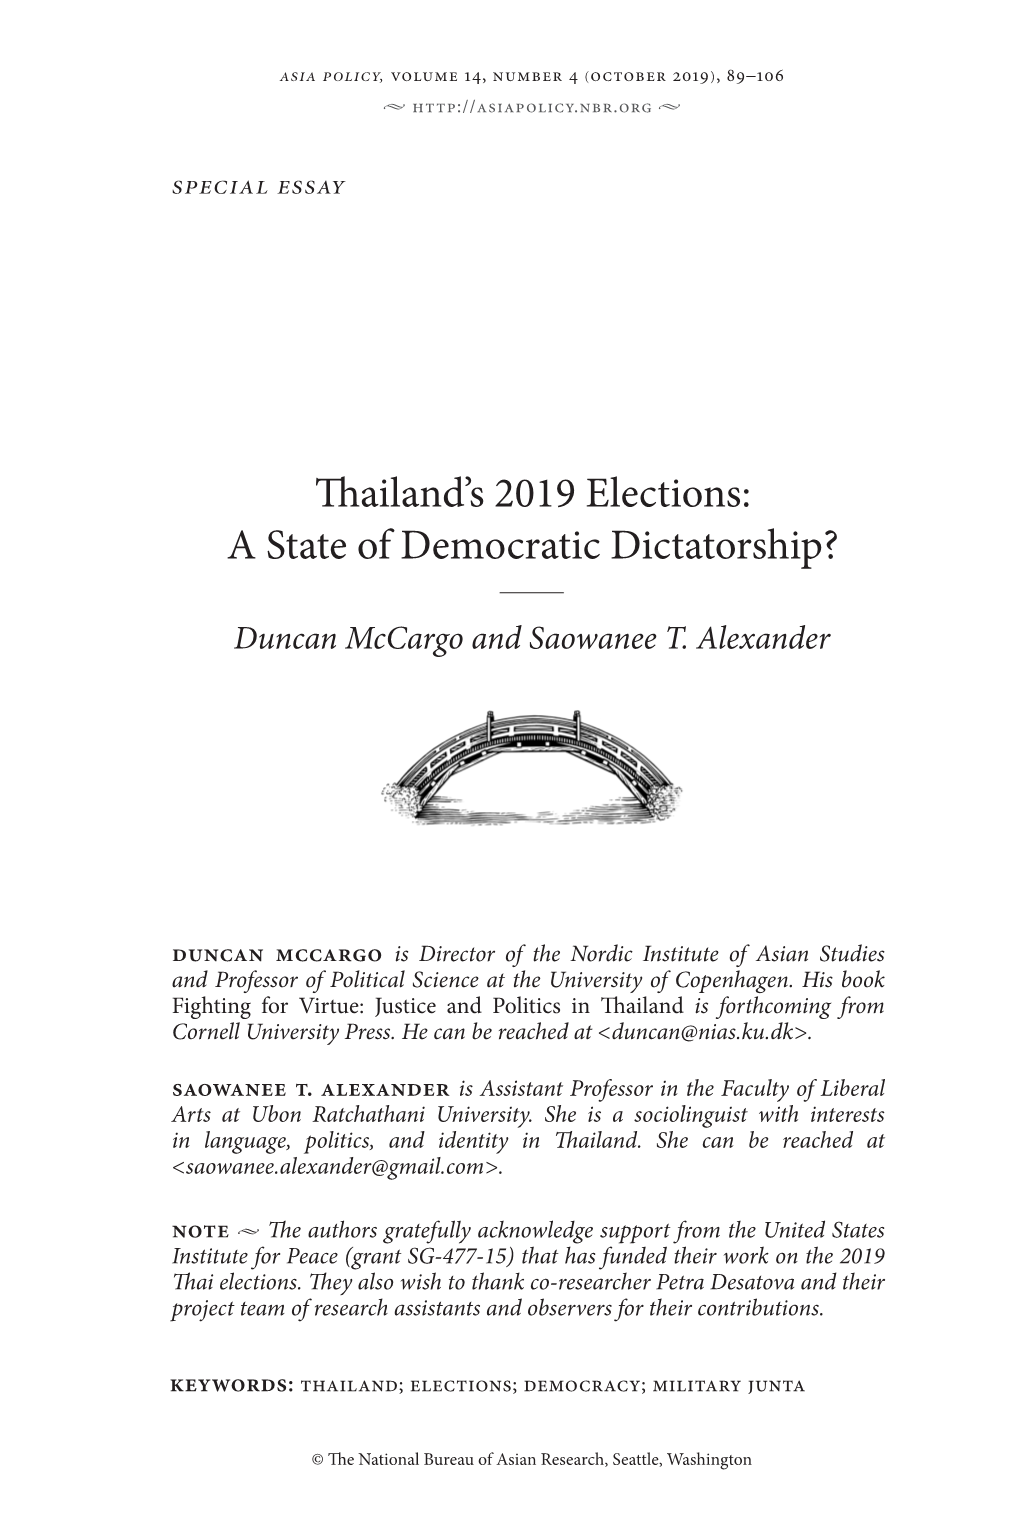 Thailand's 2019 Elections: a State of Democratic Dictatorship?